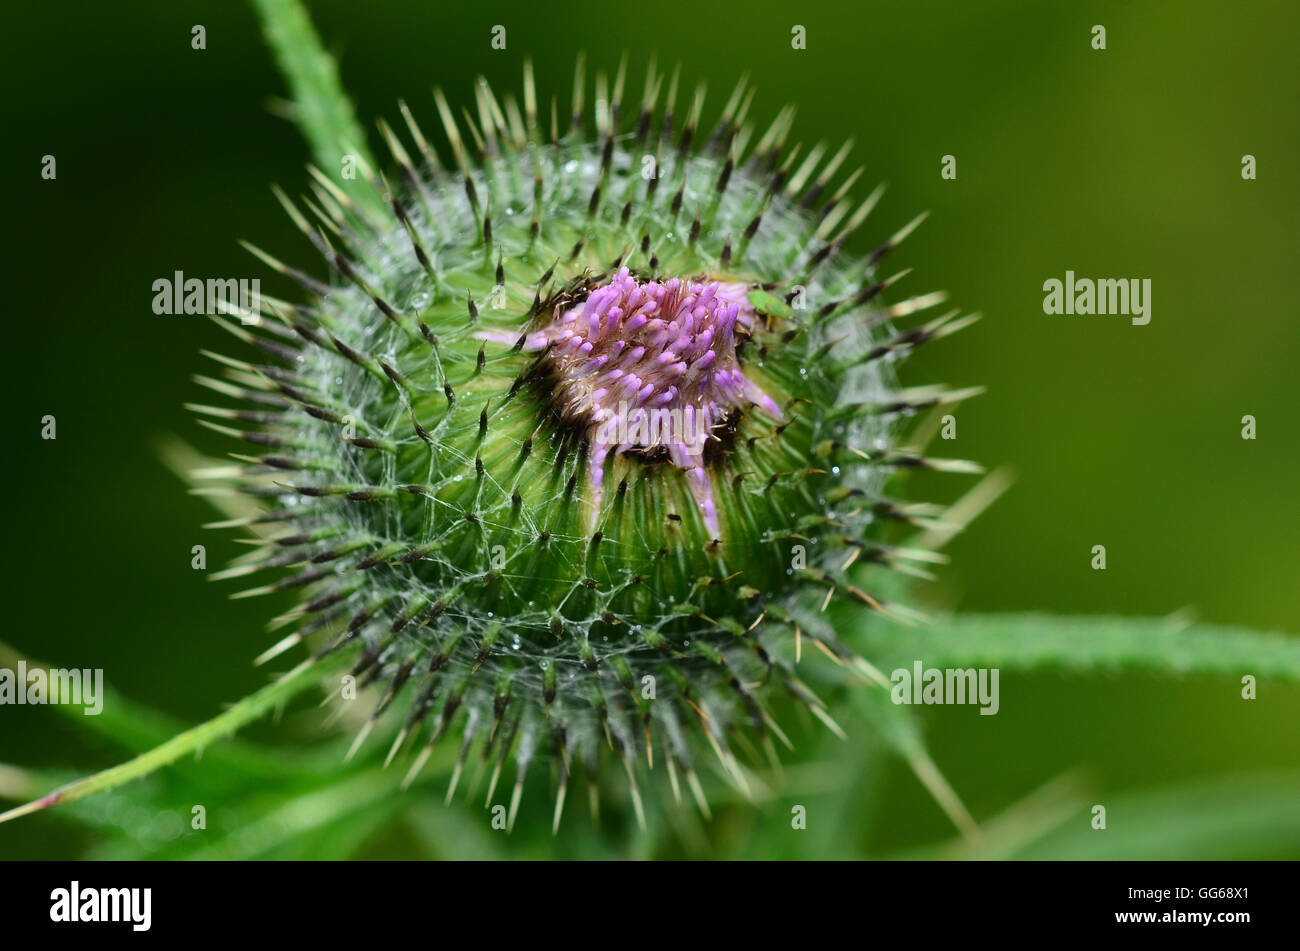 Spear thistle bud Foto Stock